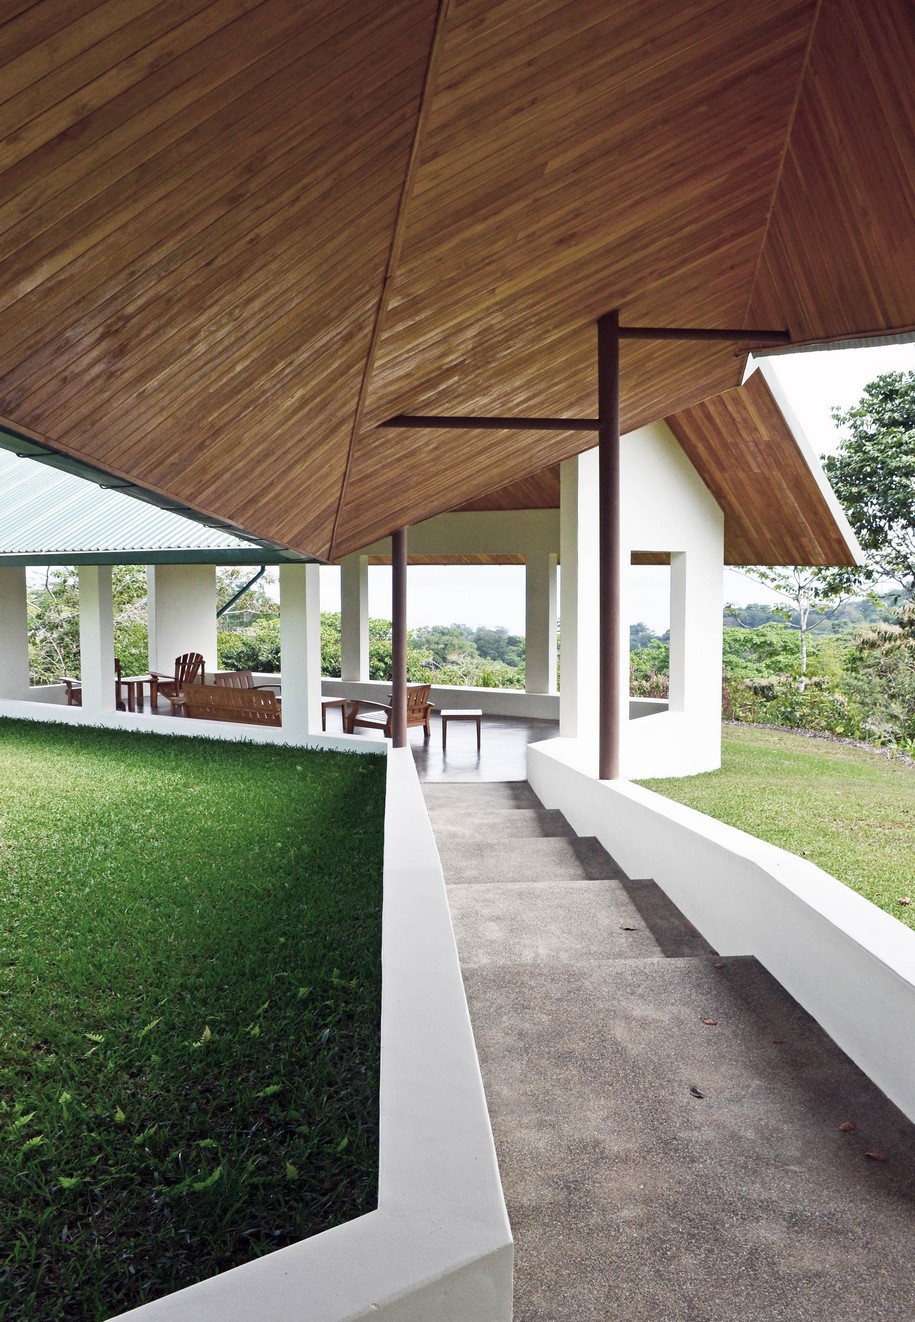 Casa Osa, OBRA Architects, vacation home, hill, residential, Costa Rica, 2013, wood